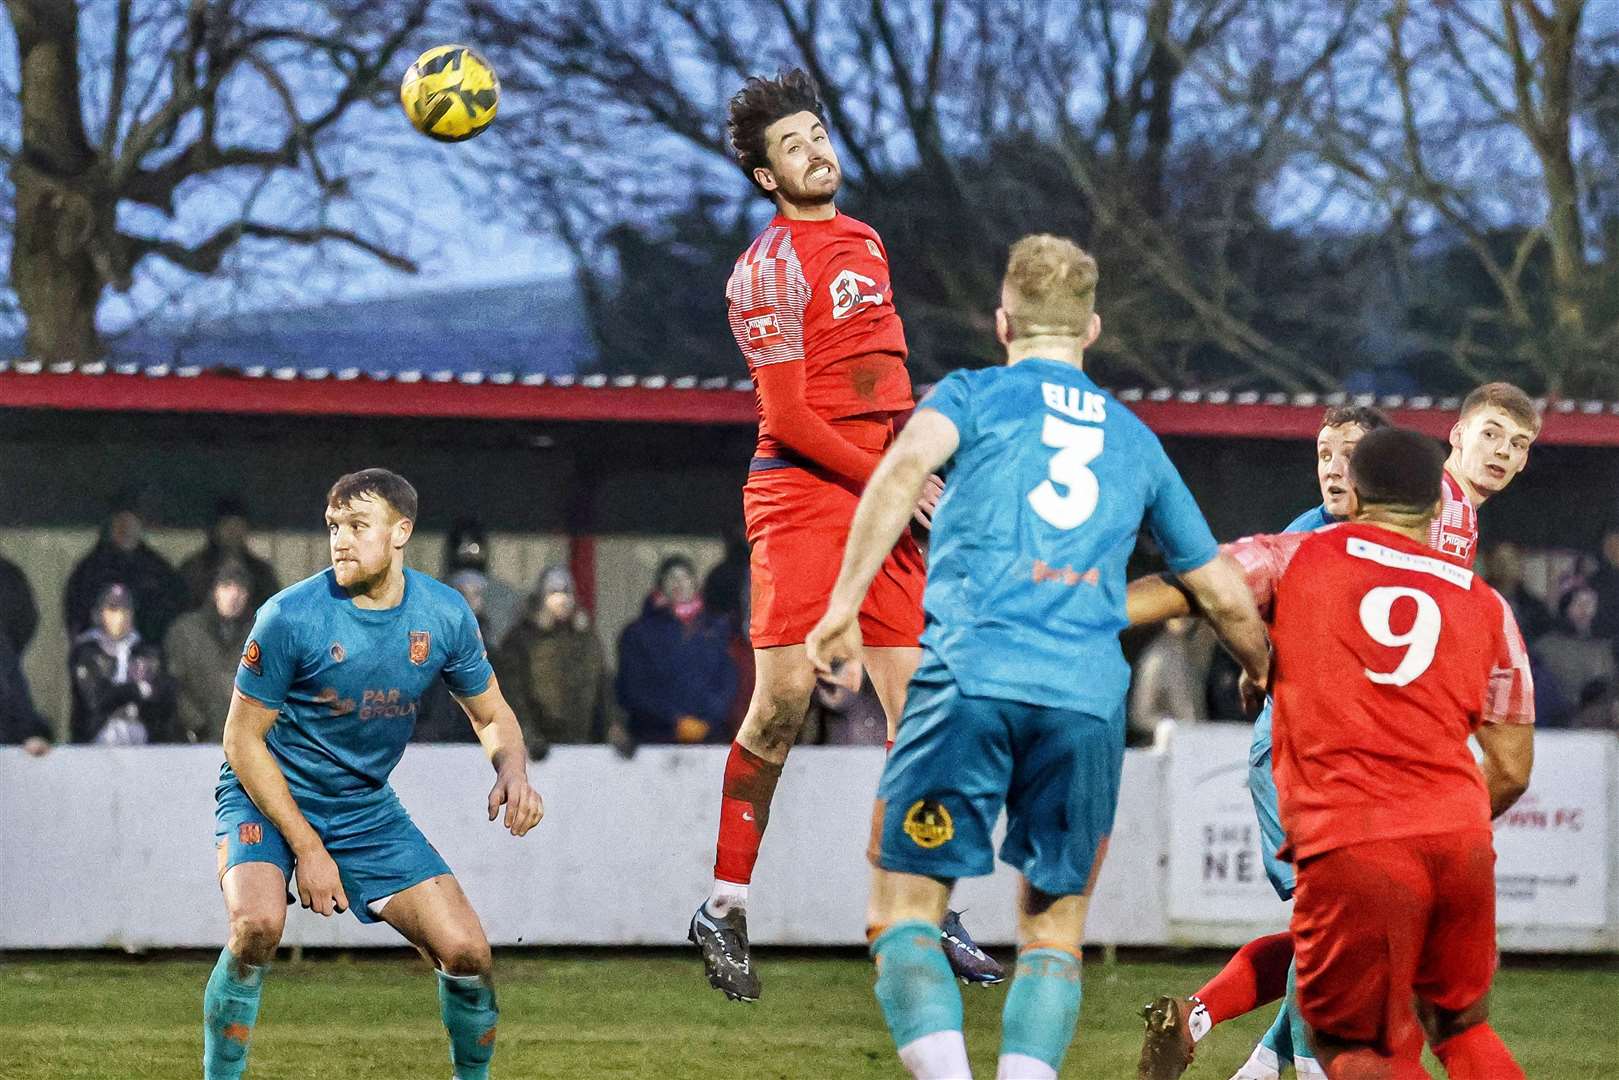 Hythe defender Jack Steventon has been praised for his loyalty. Picture: Helen Cooper